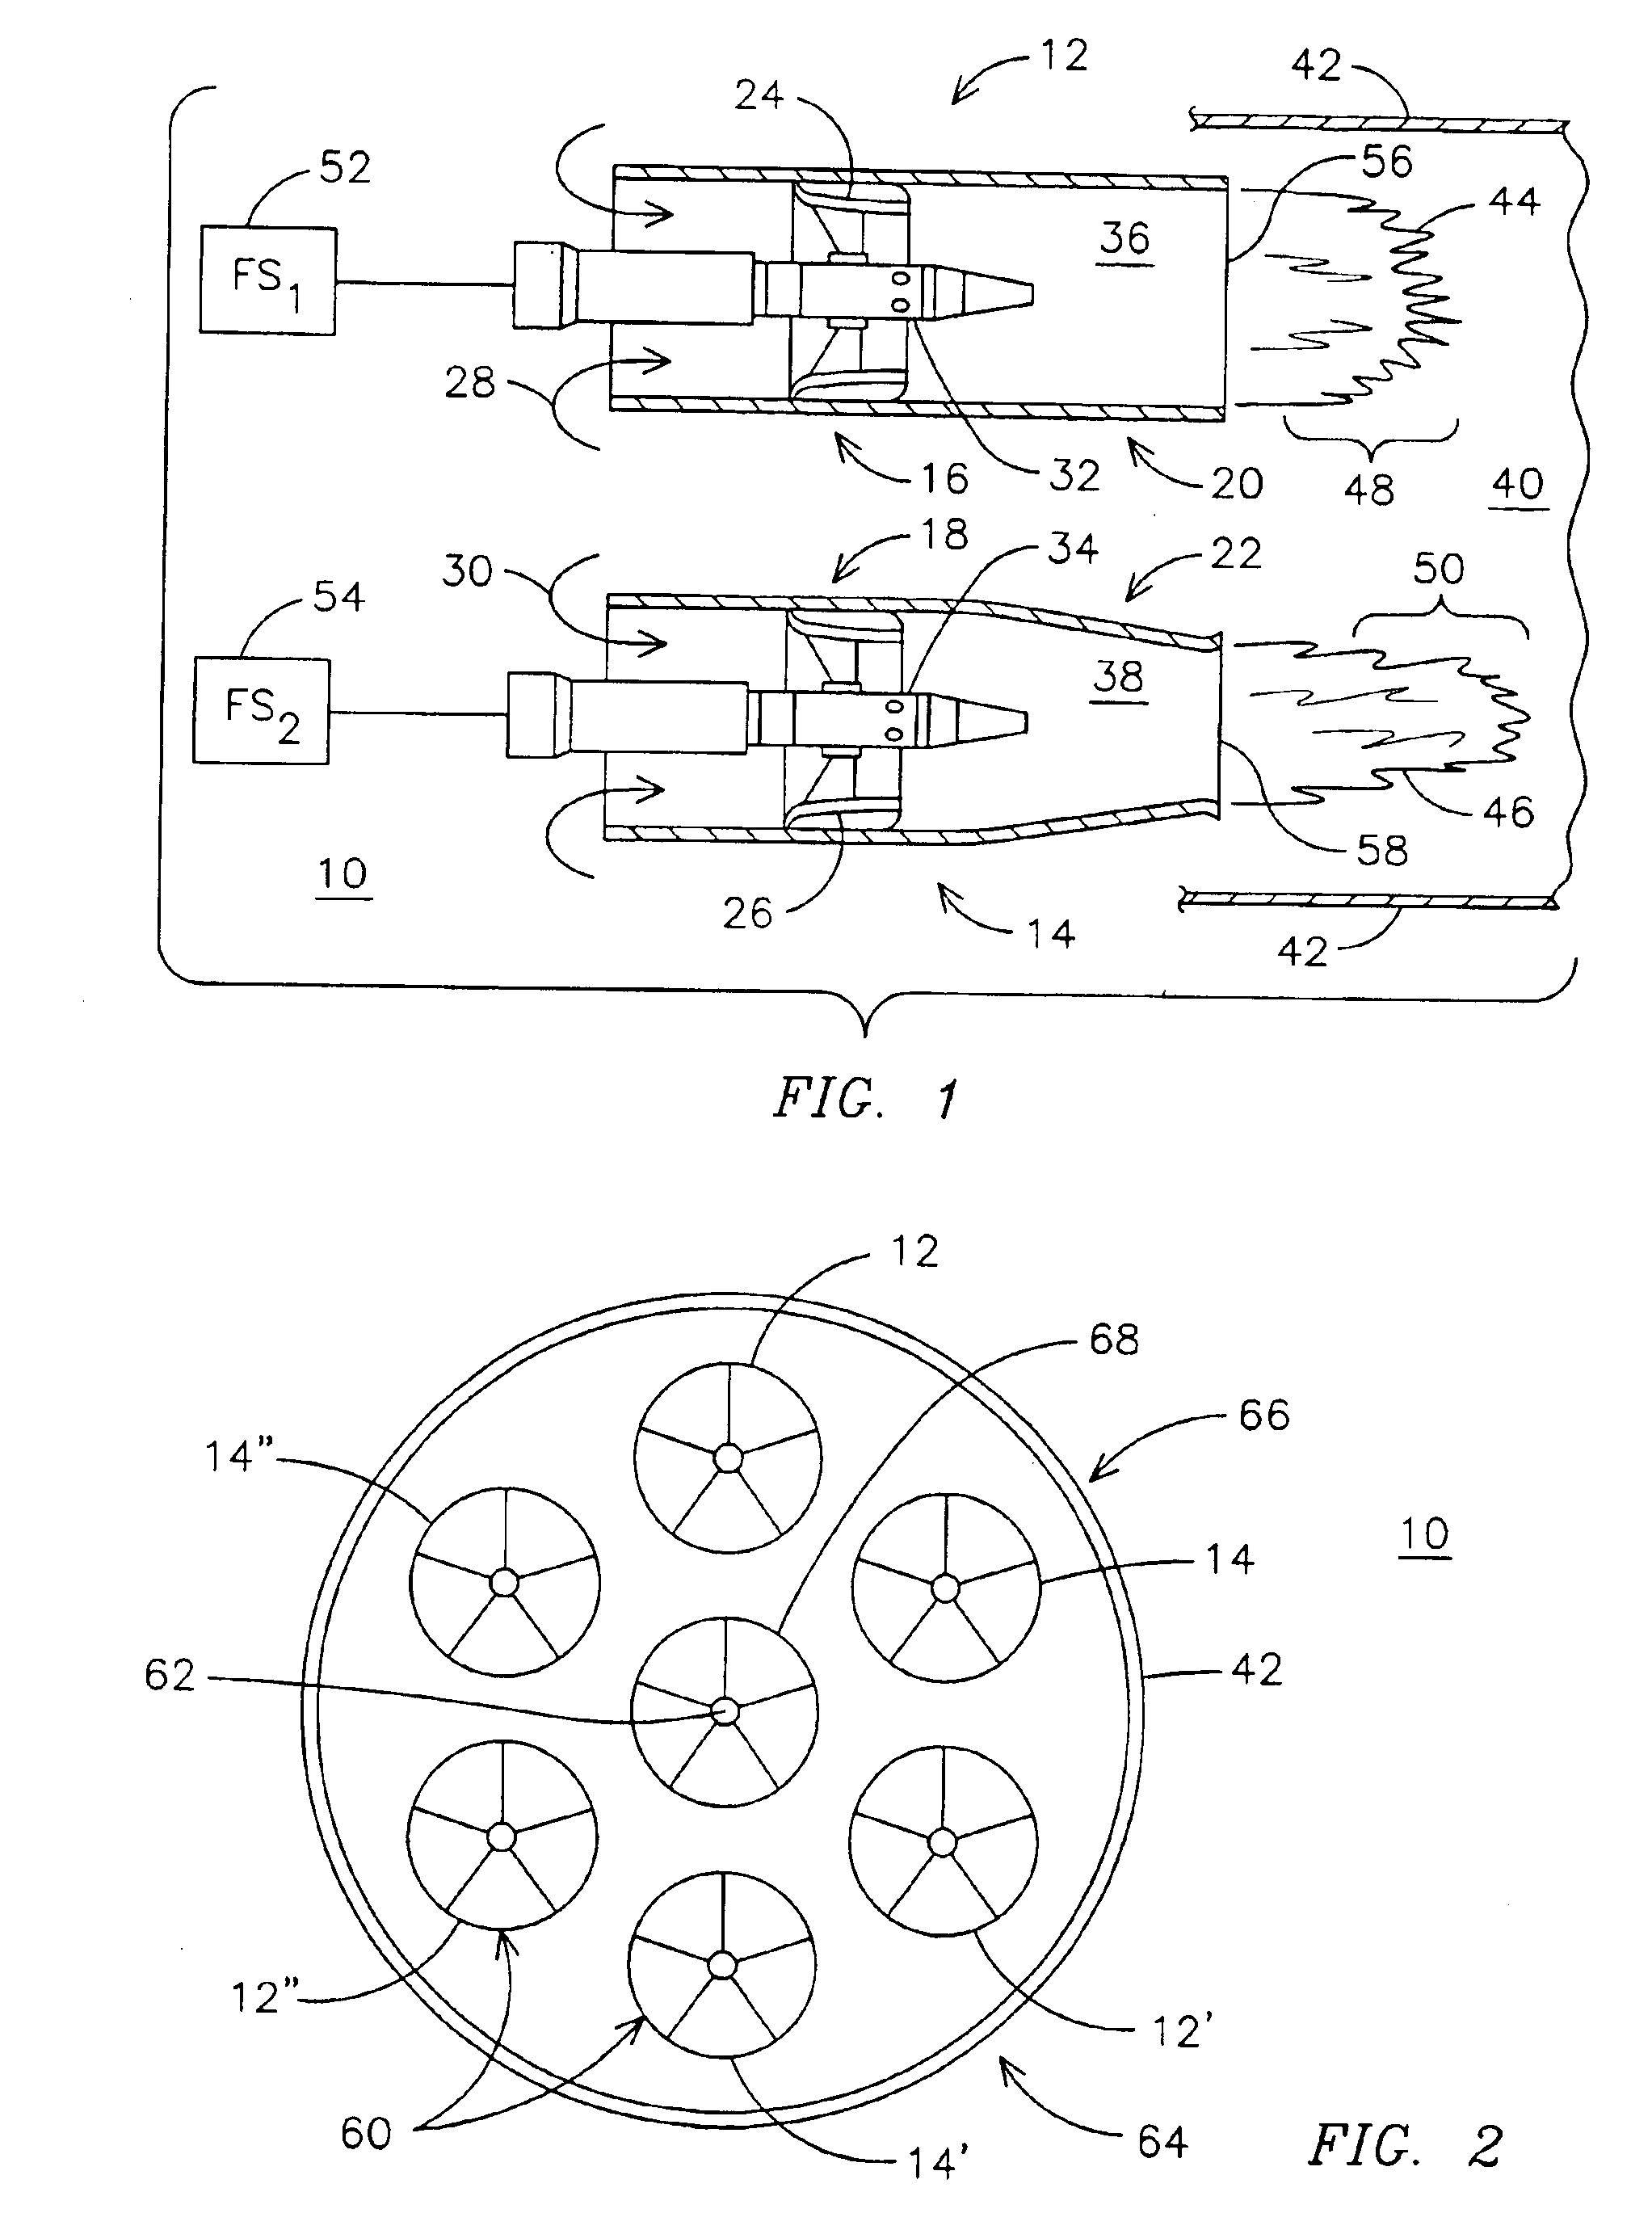 Gas turbine combustor having staged burners with dissimilar mixing passage geometries